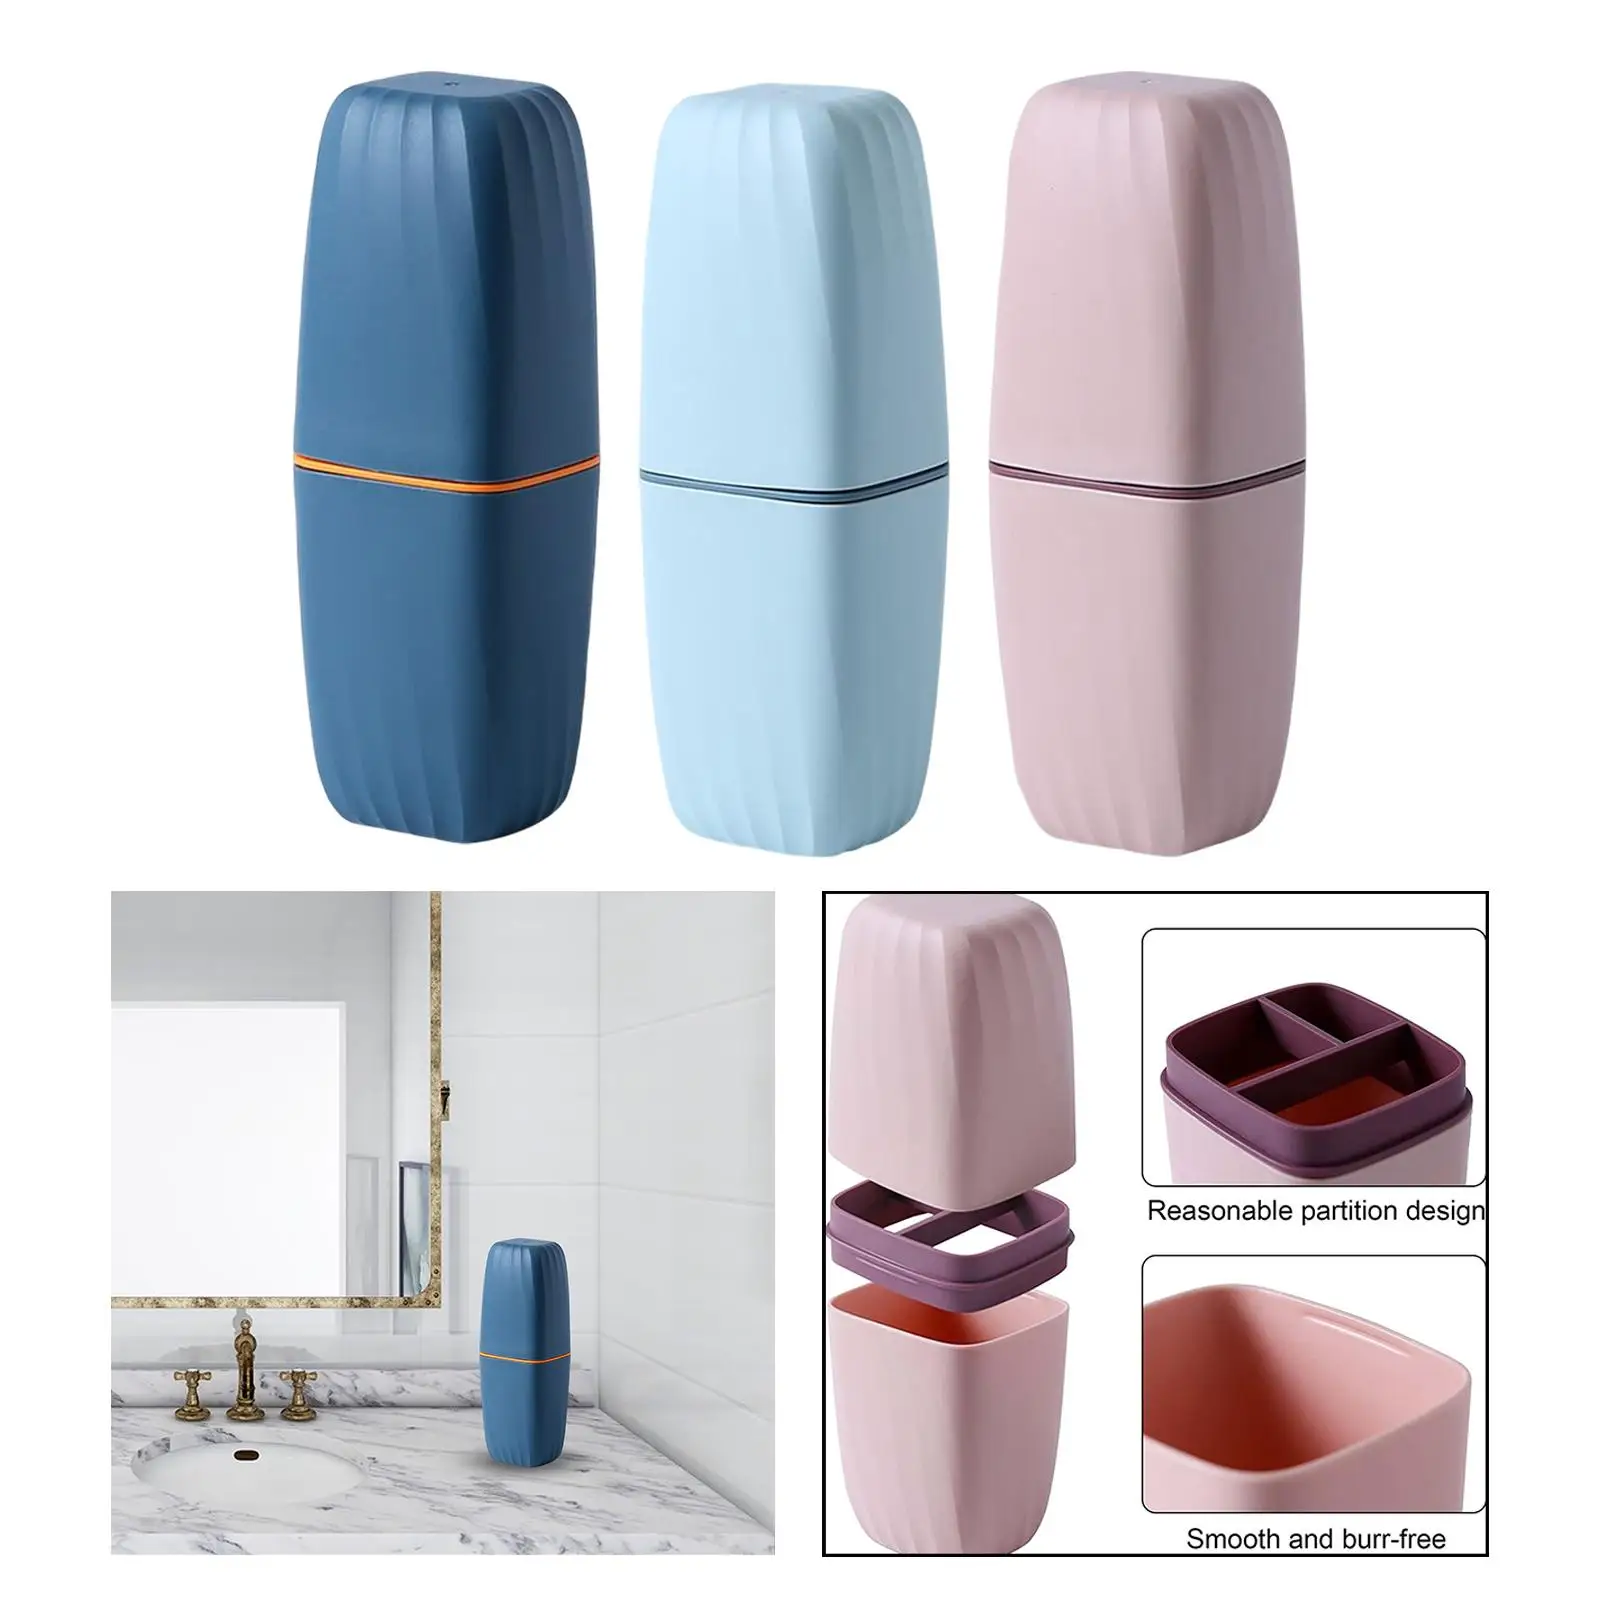 Multifunction Travel Toothbrush Holder Reusable Toothbrush Cup Portable Toothbrush Toothpaste Holder Case for Bathroom Camping